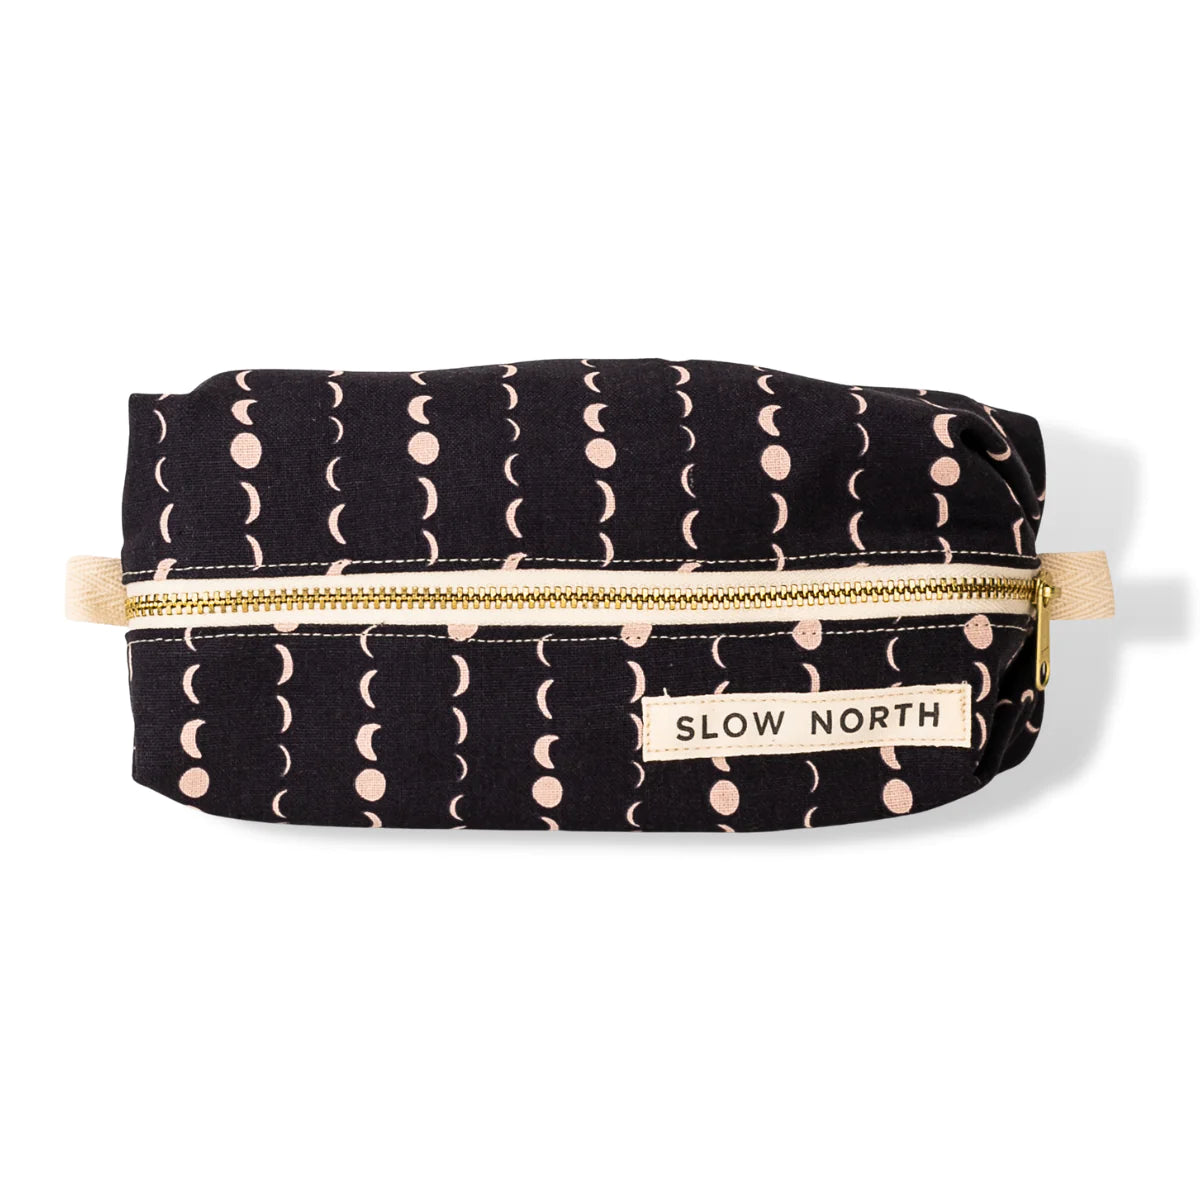 Slow North Travel Pouch